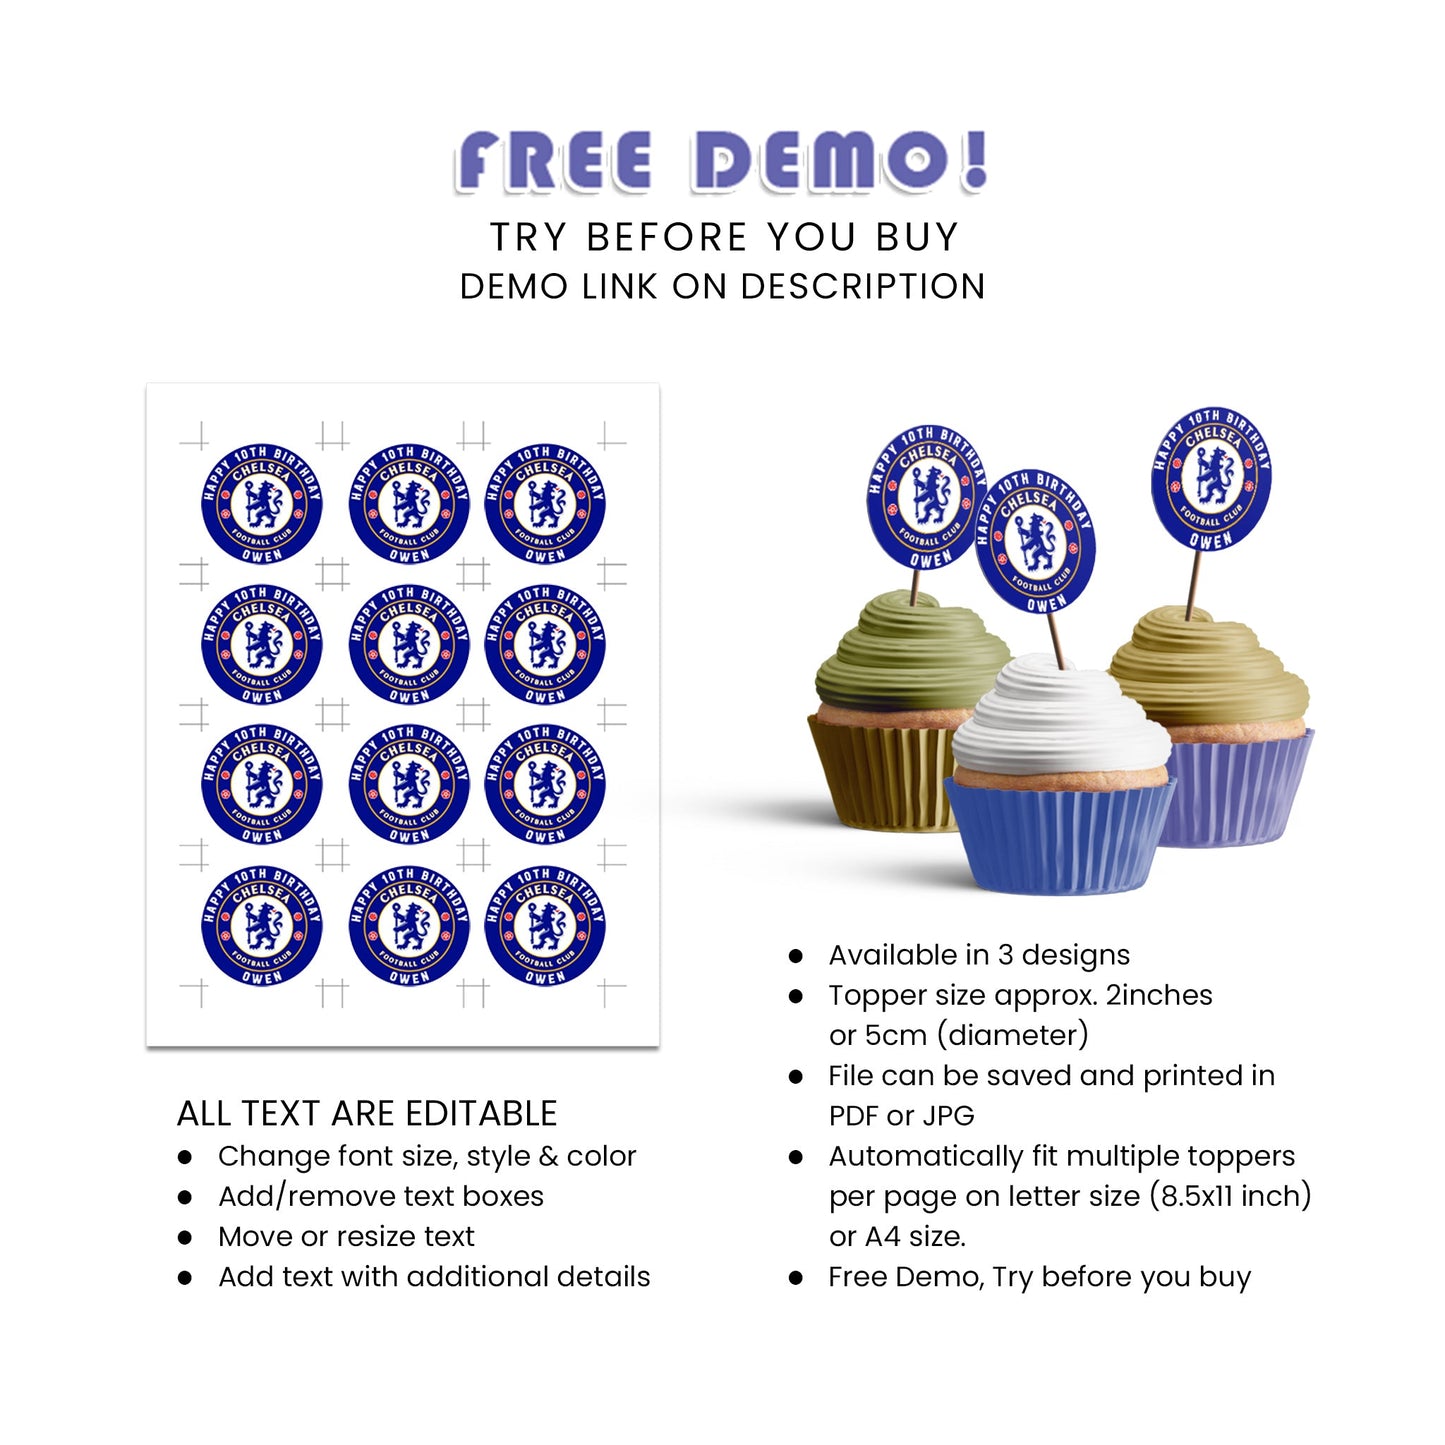 Chelsea FC Personalized Cupcakes Toppers - A Sweet Addition to Your Party